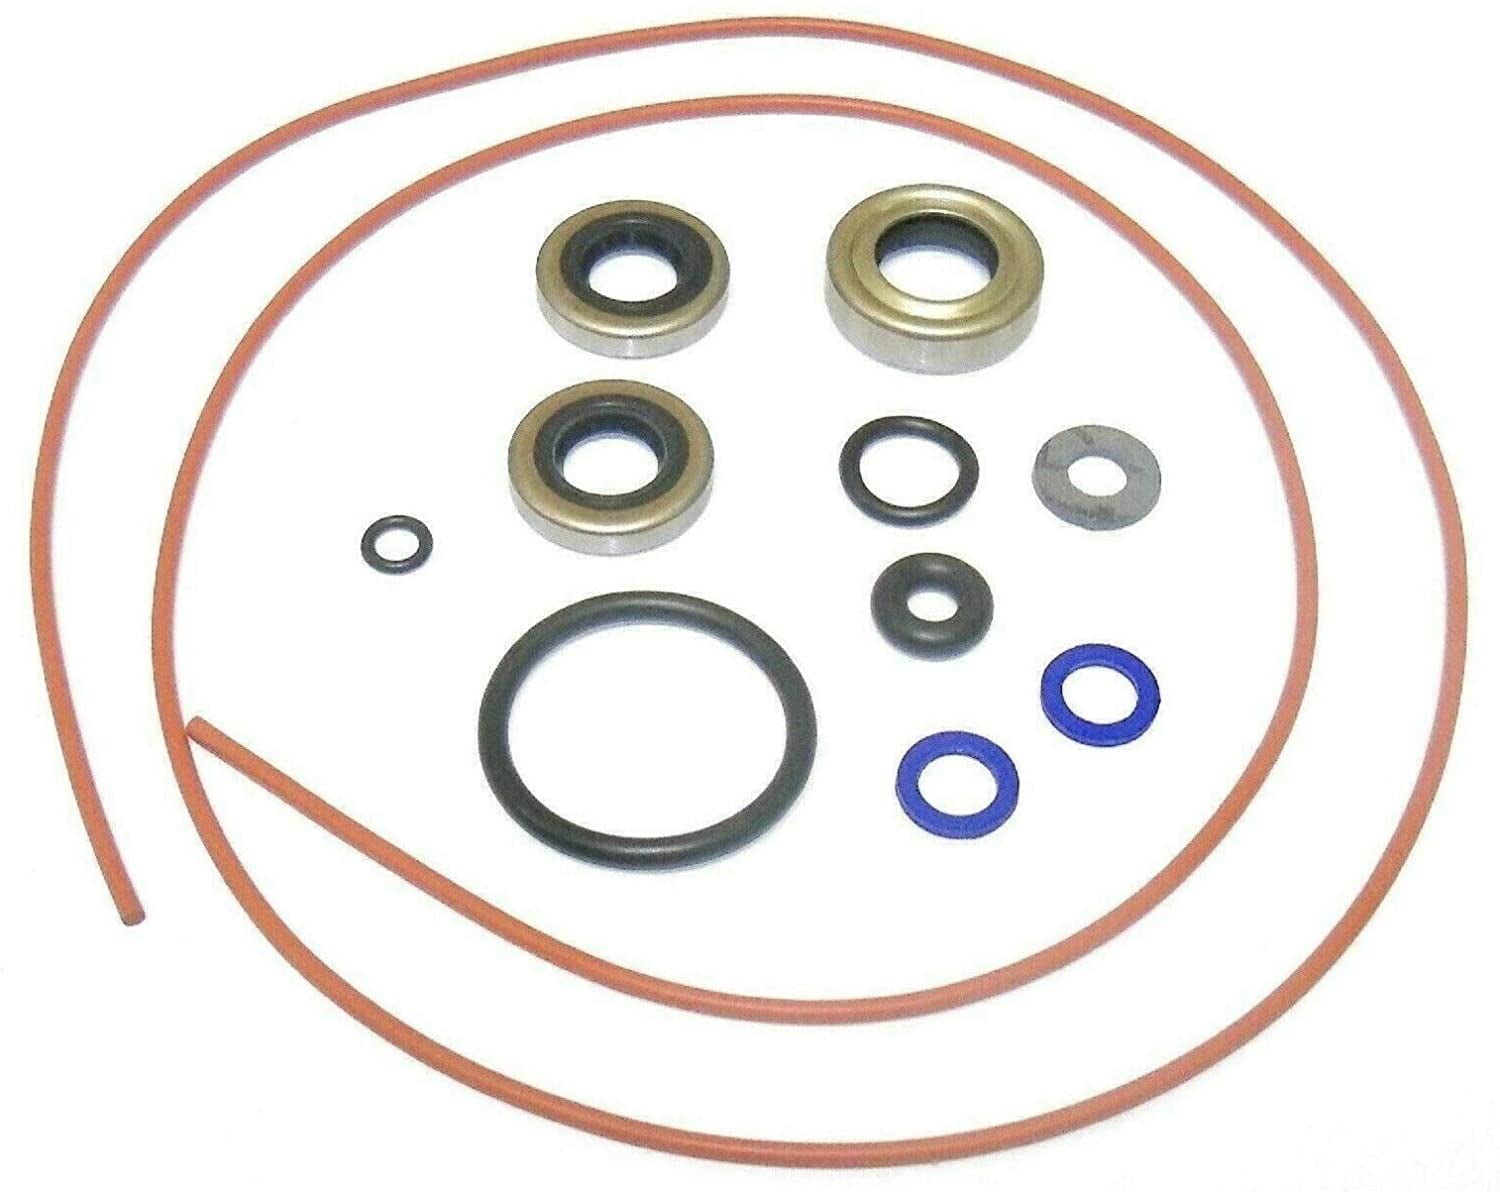 Engineered Marine Products Lower Unit Gearcase Seal Kit for Johnson Evinrude 18 18-2684 Replaces 309044 20 25 Hp 1958-1978 